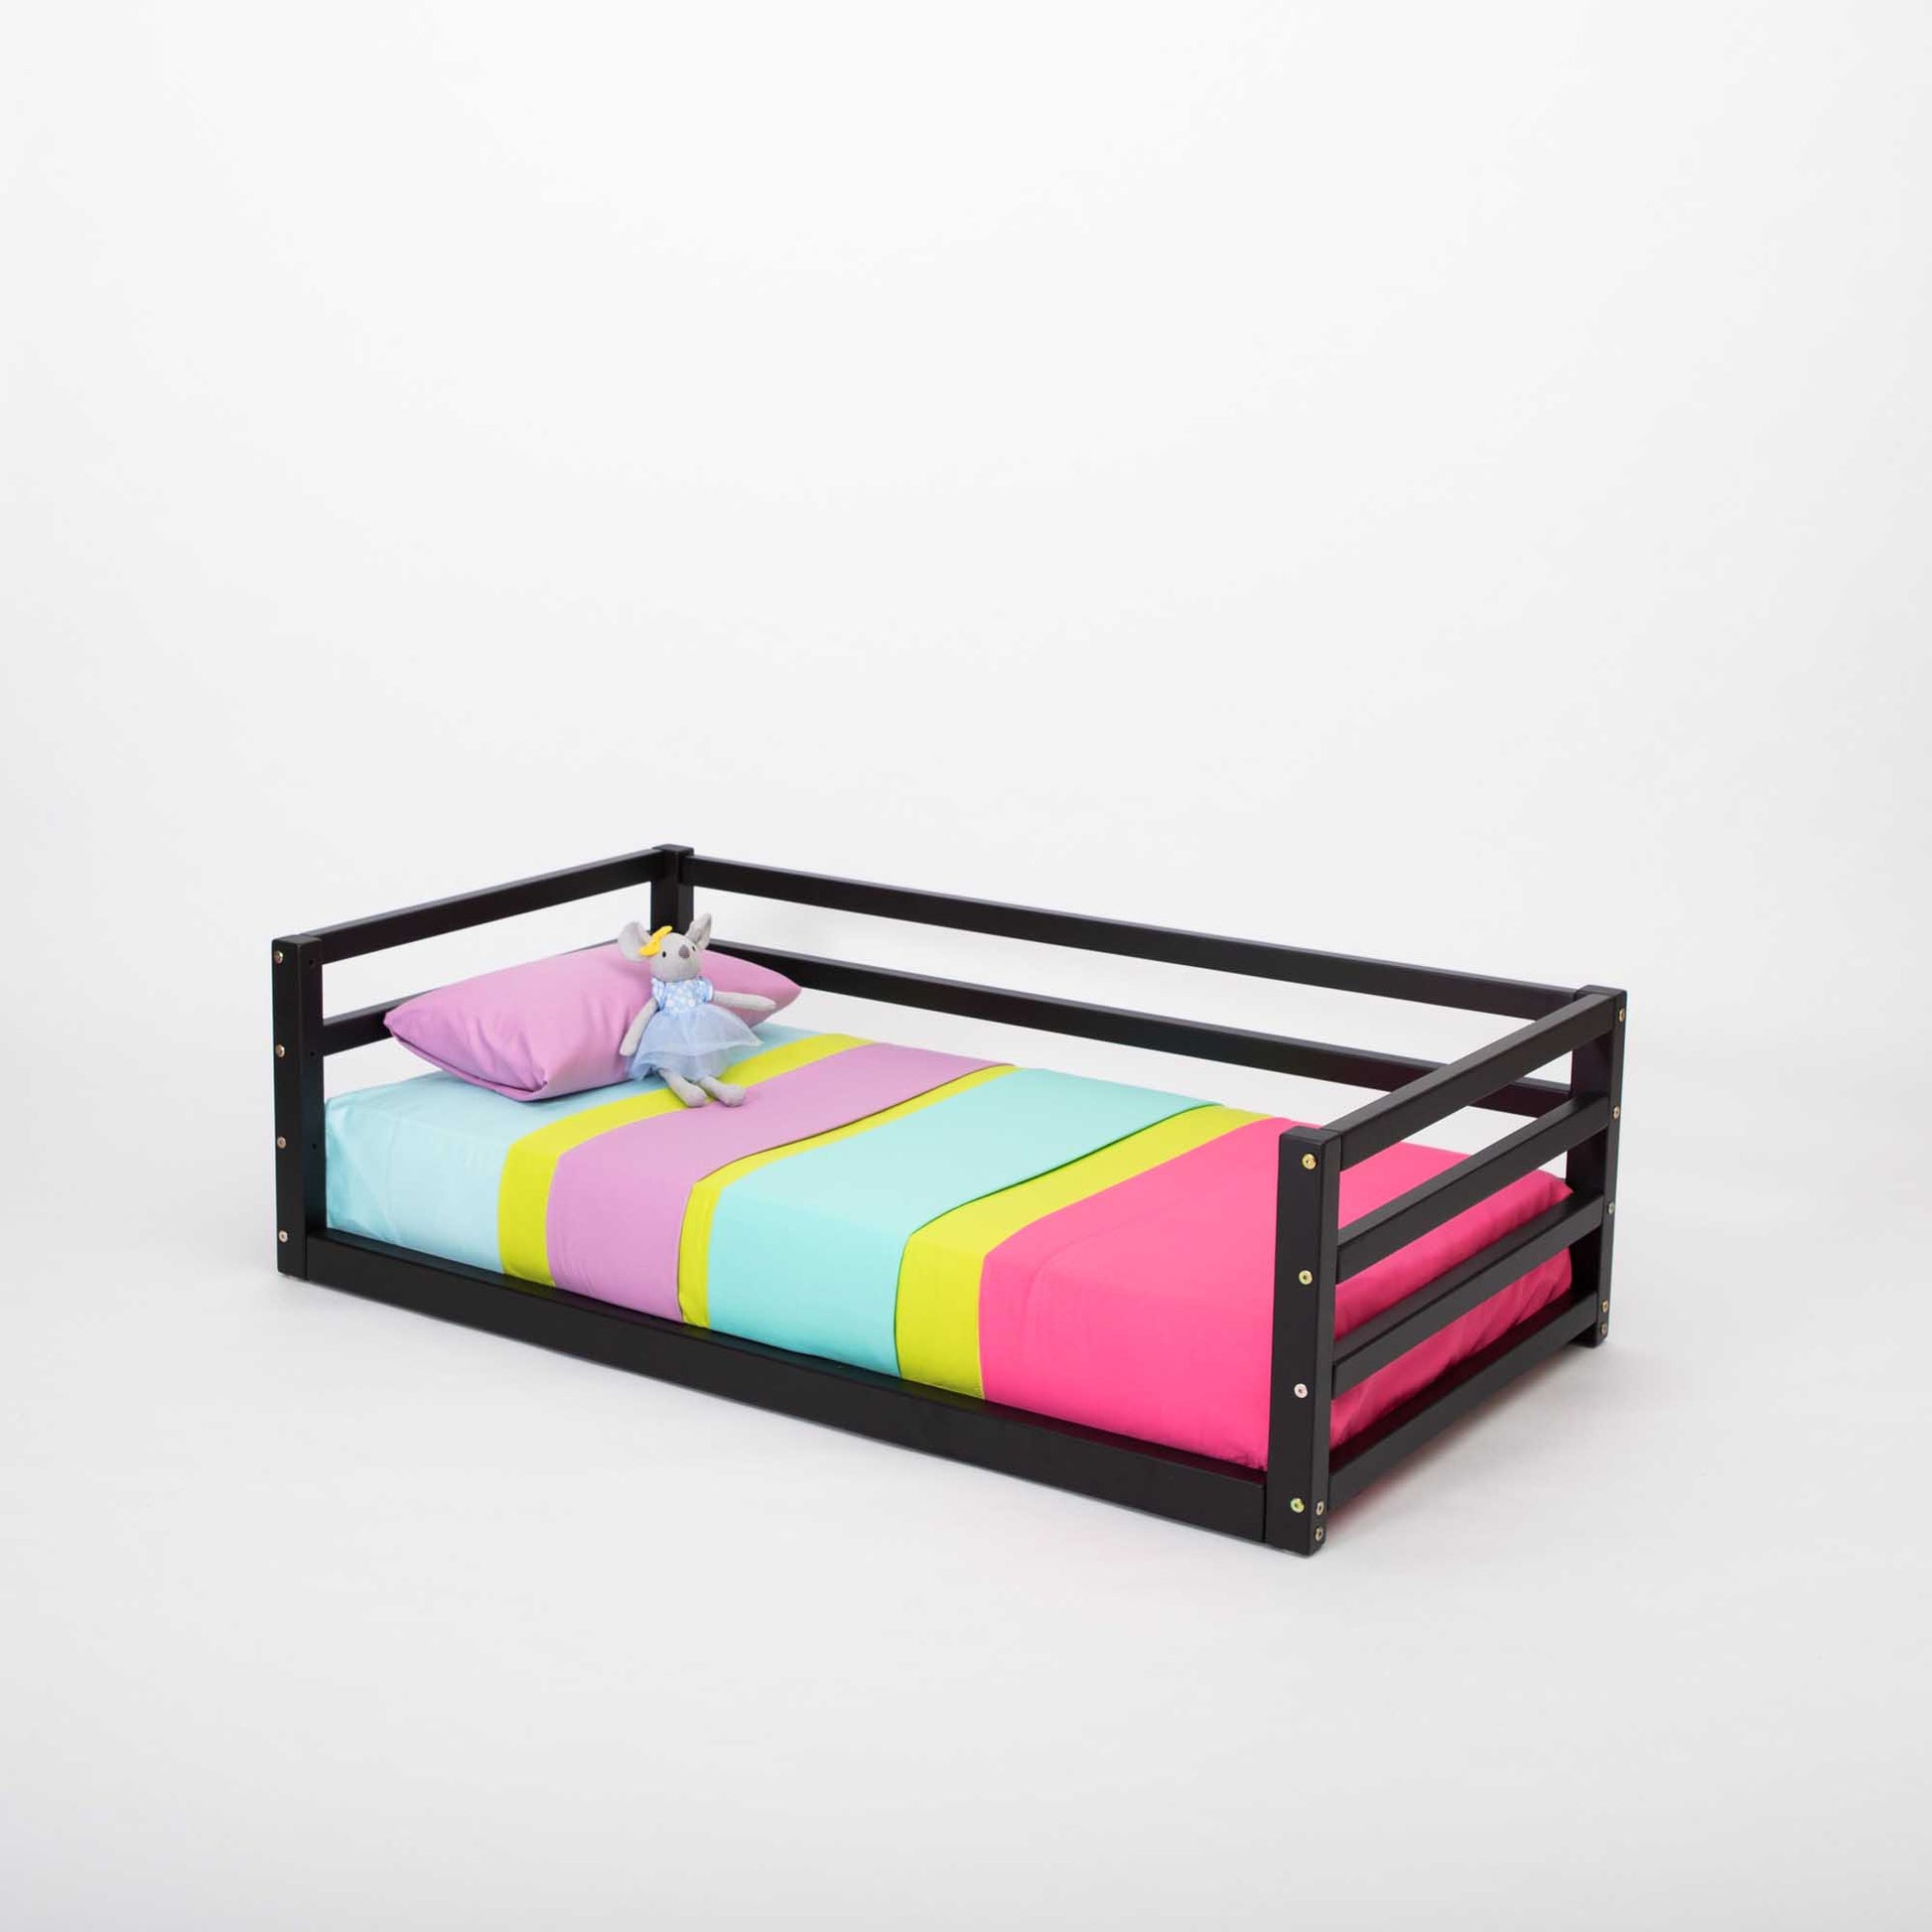 A Sweet Home From Wood children's floor level bed with colorful sheets, a black frame, and a 3-sided safety rail.